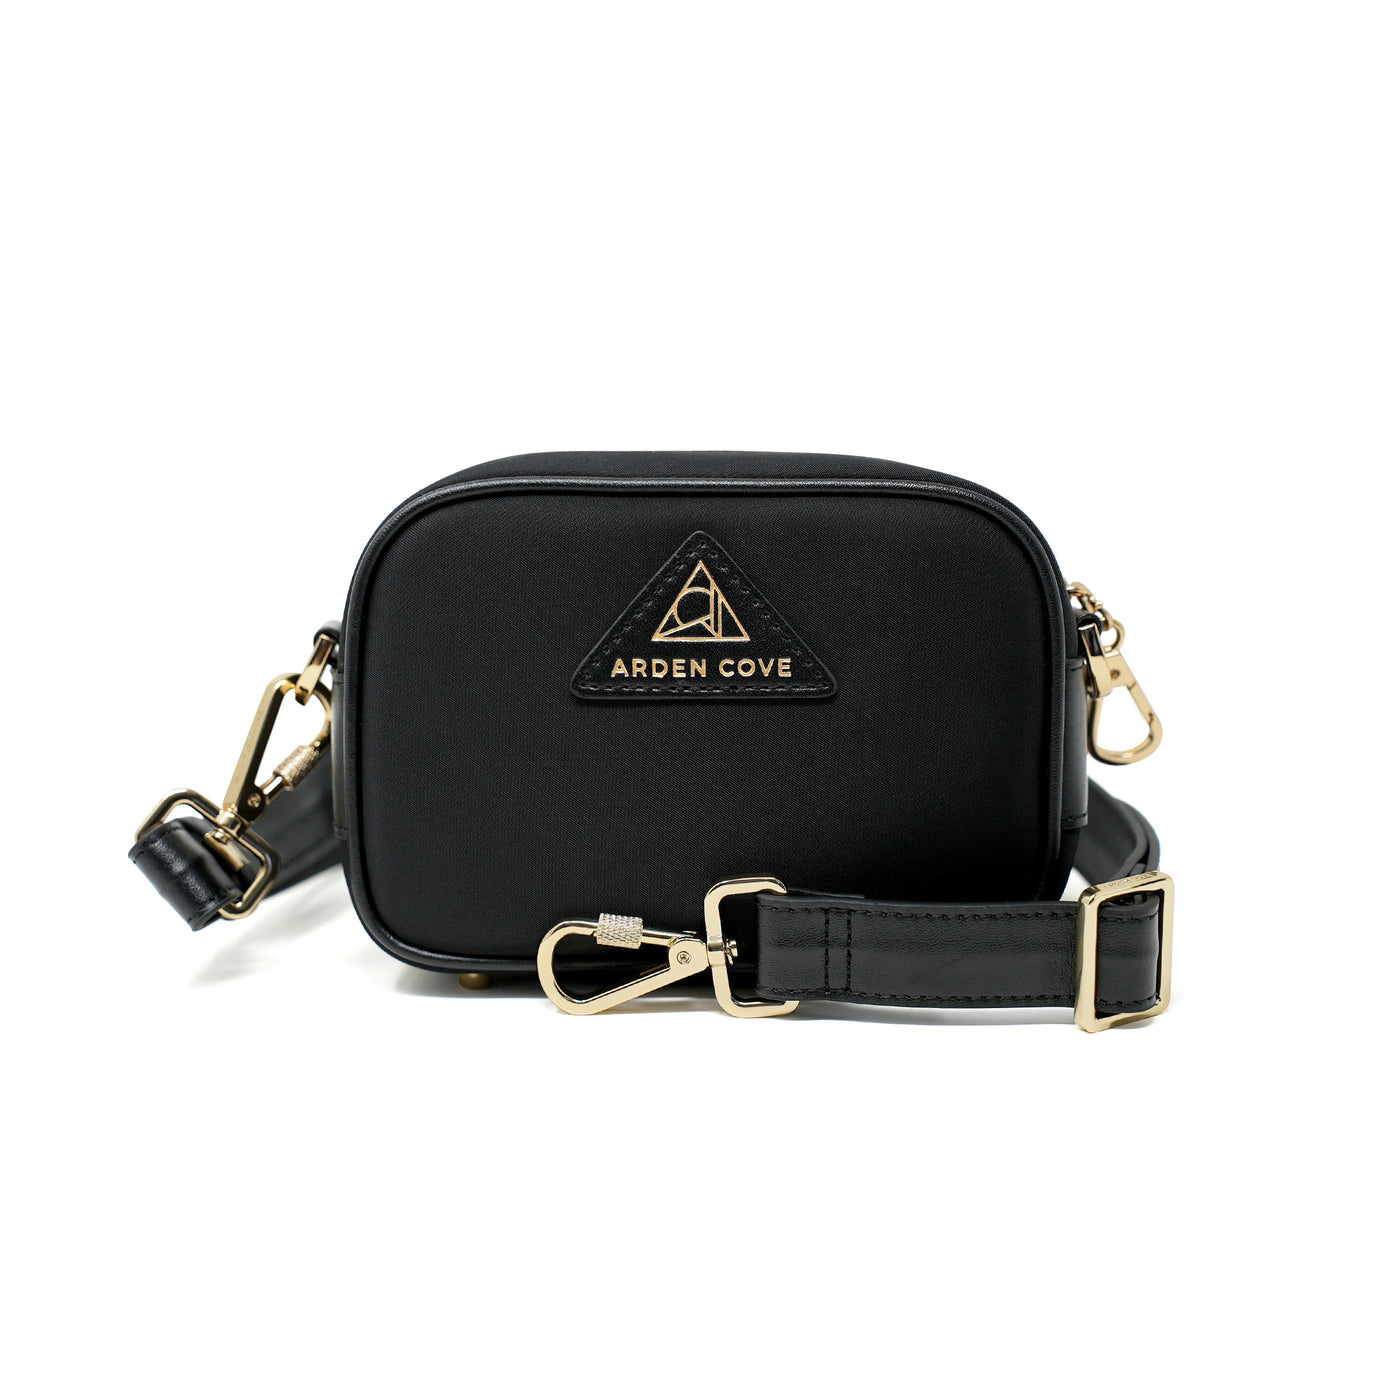 Anti-theft Water-resistant Travel Crossbody - Crissy Mini Crossbody in Black Gold with slash-resistant wide faux leather & locking clasps straps - front view - Arden Cove